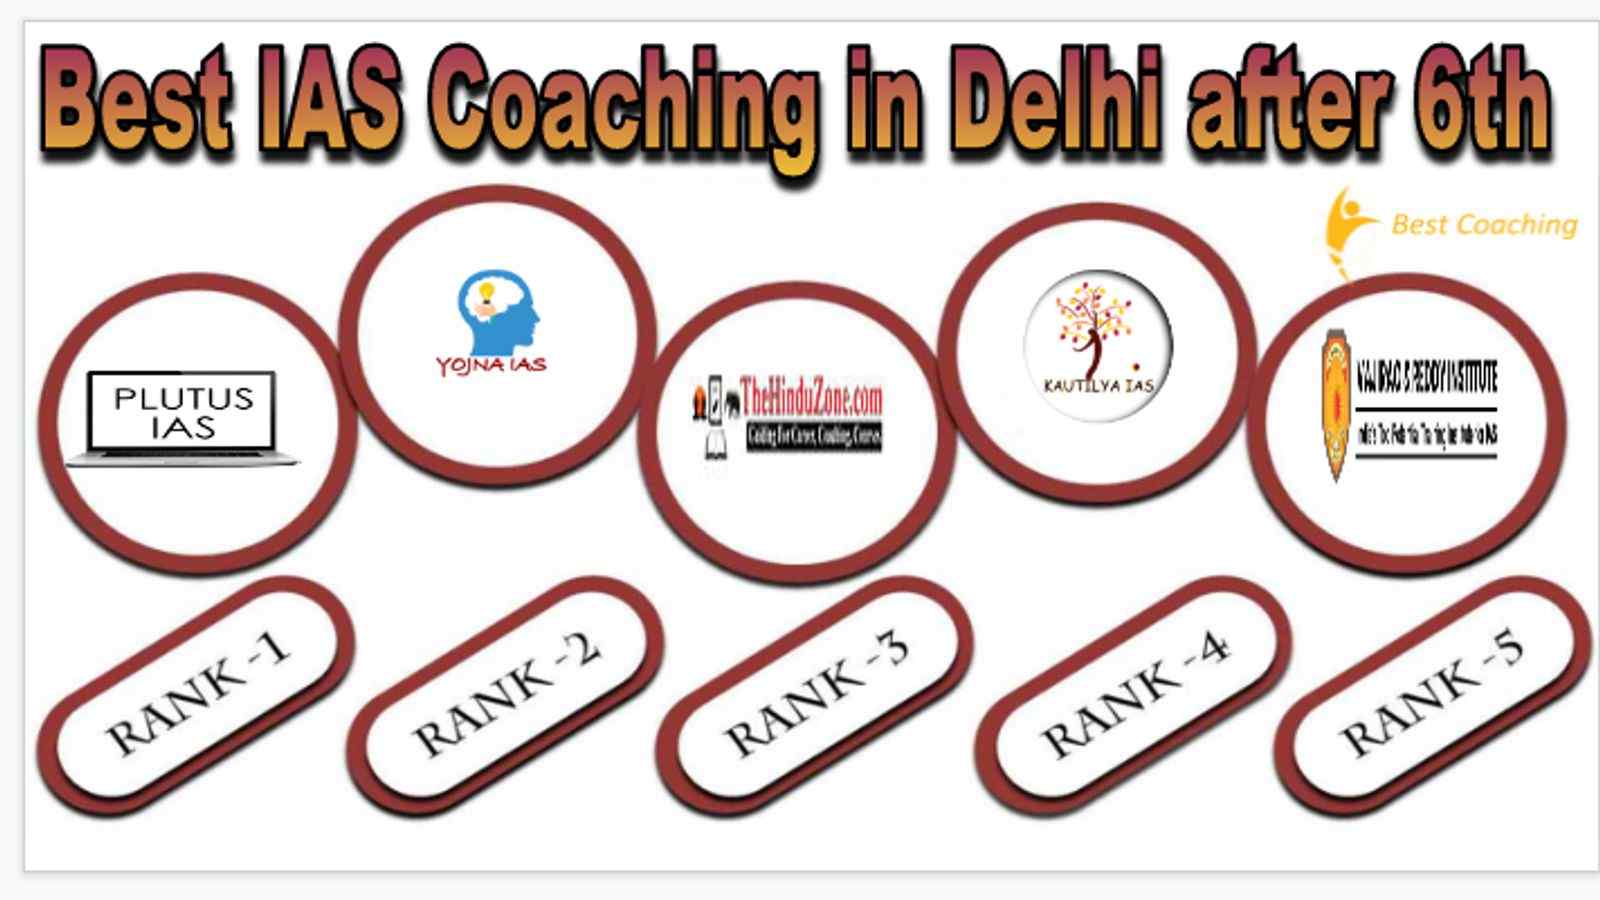 Best IAS coaching in Delhi after 6th